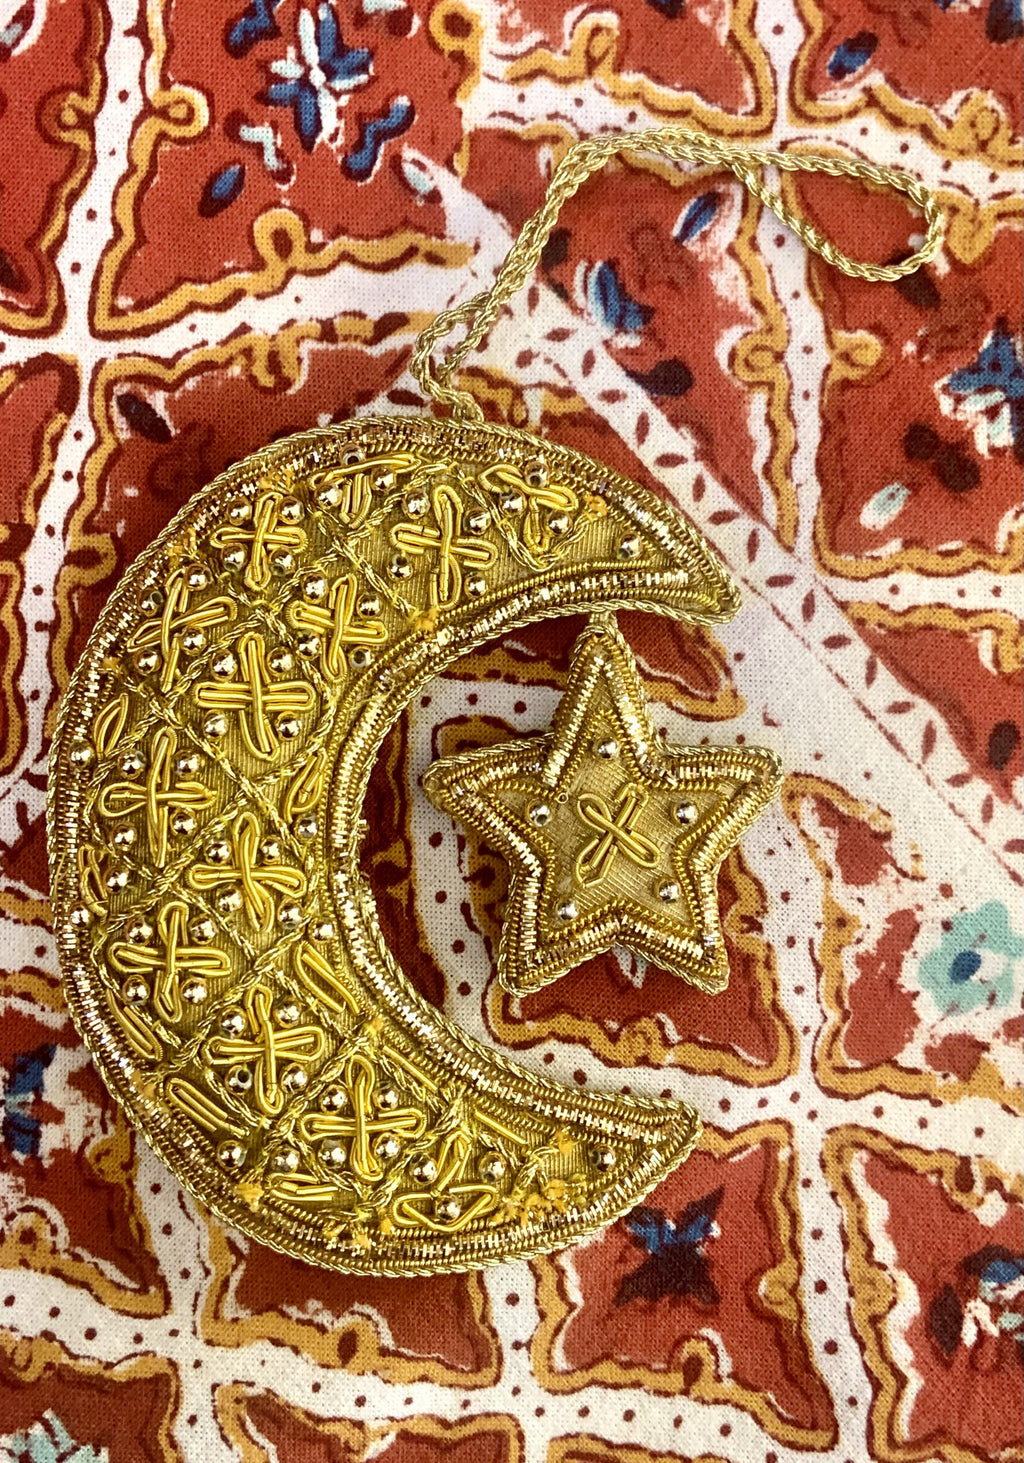 Moon and Star Ornament